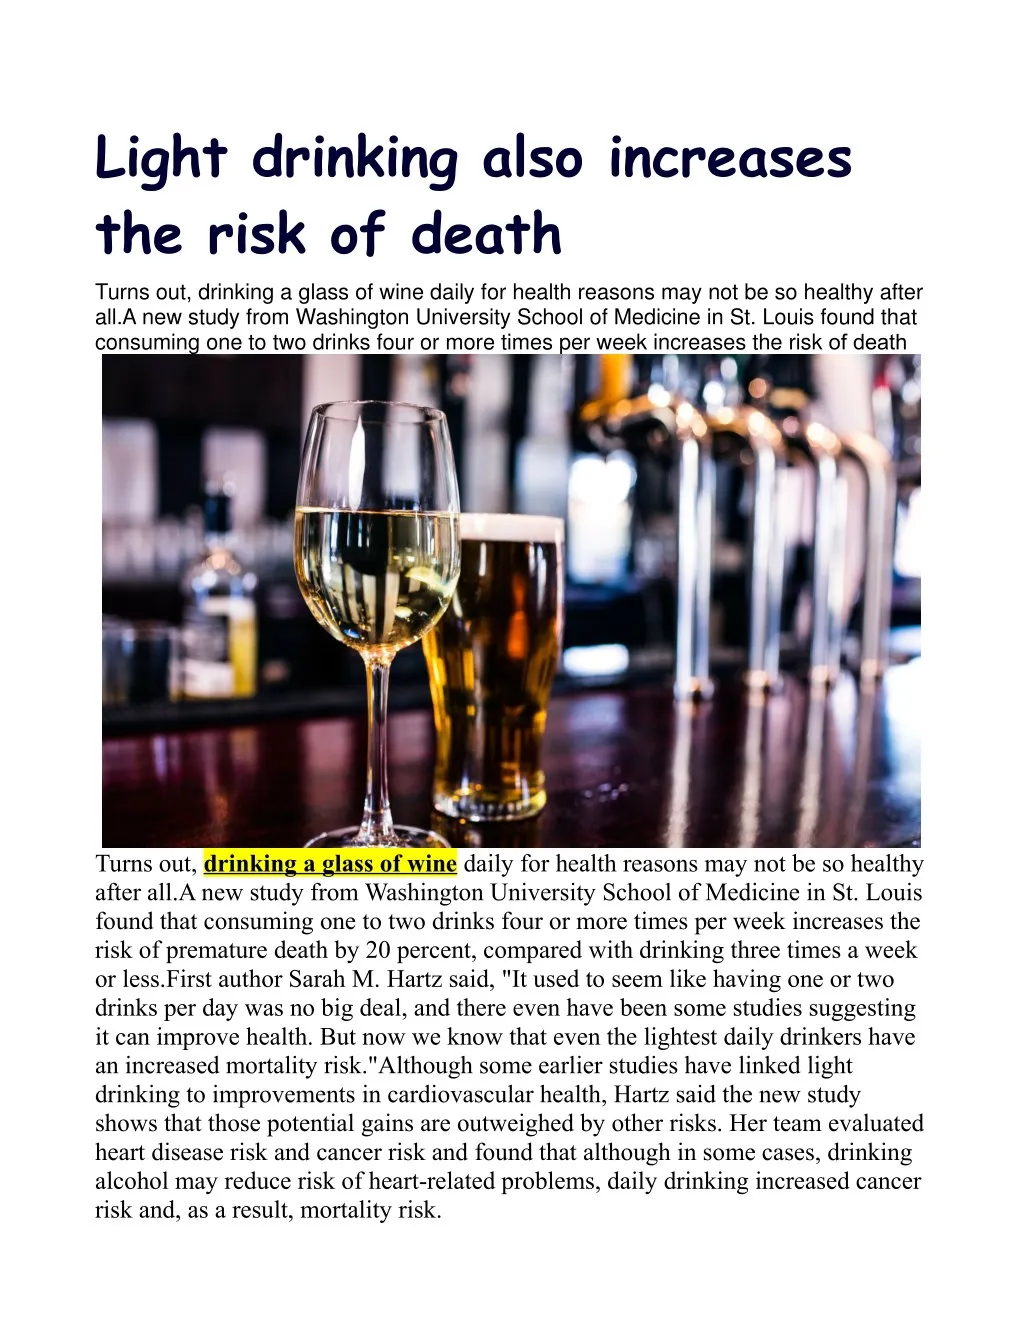 light drinking also increases the risk of death